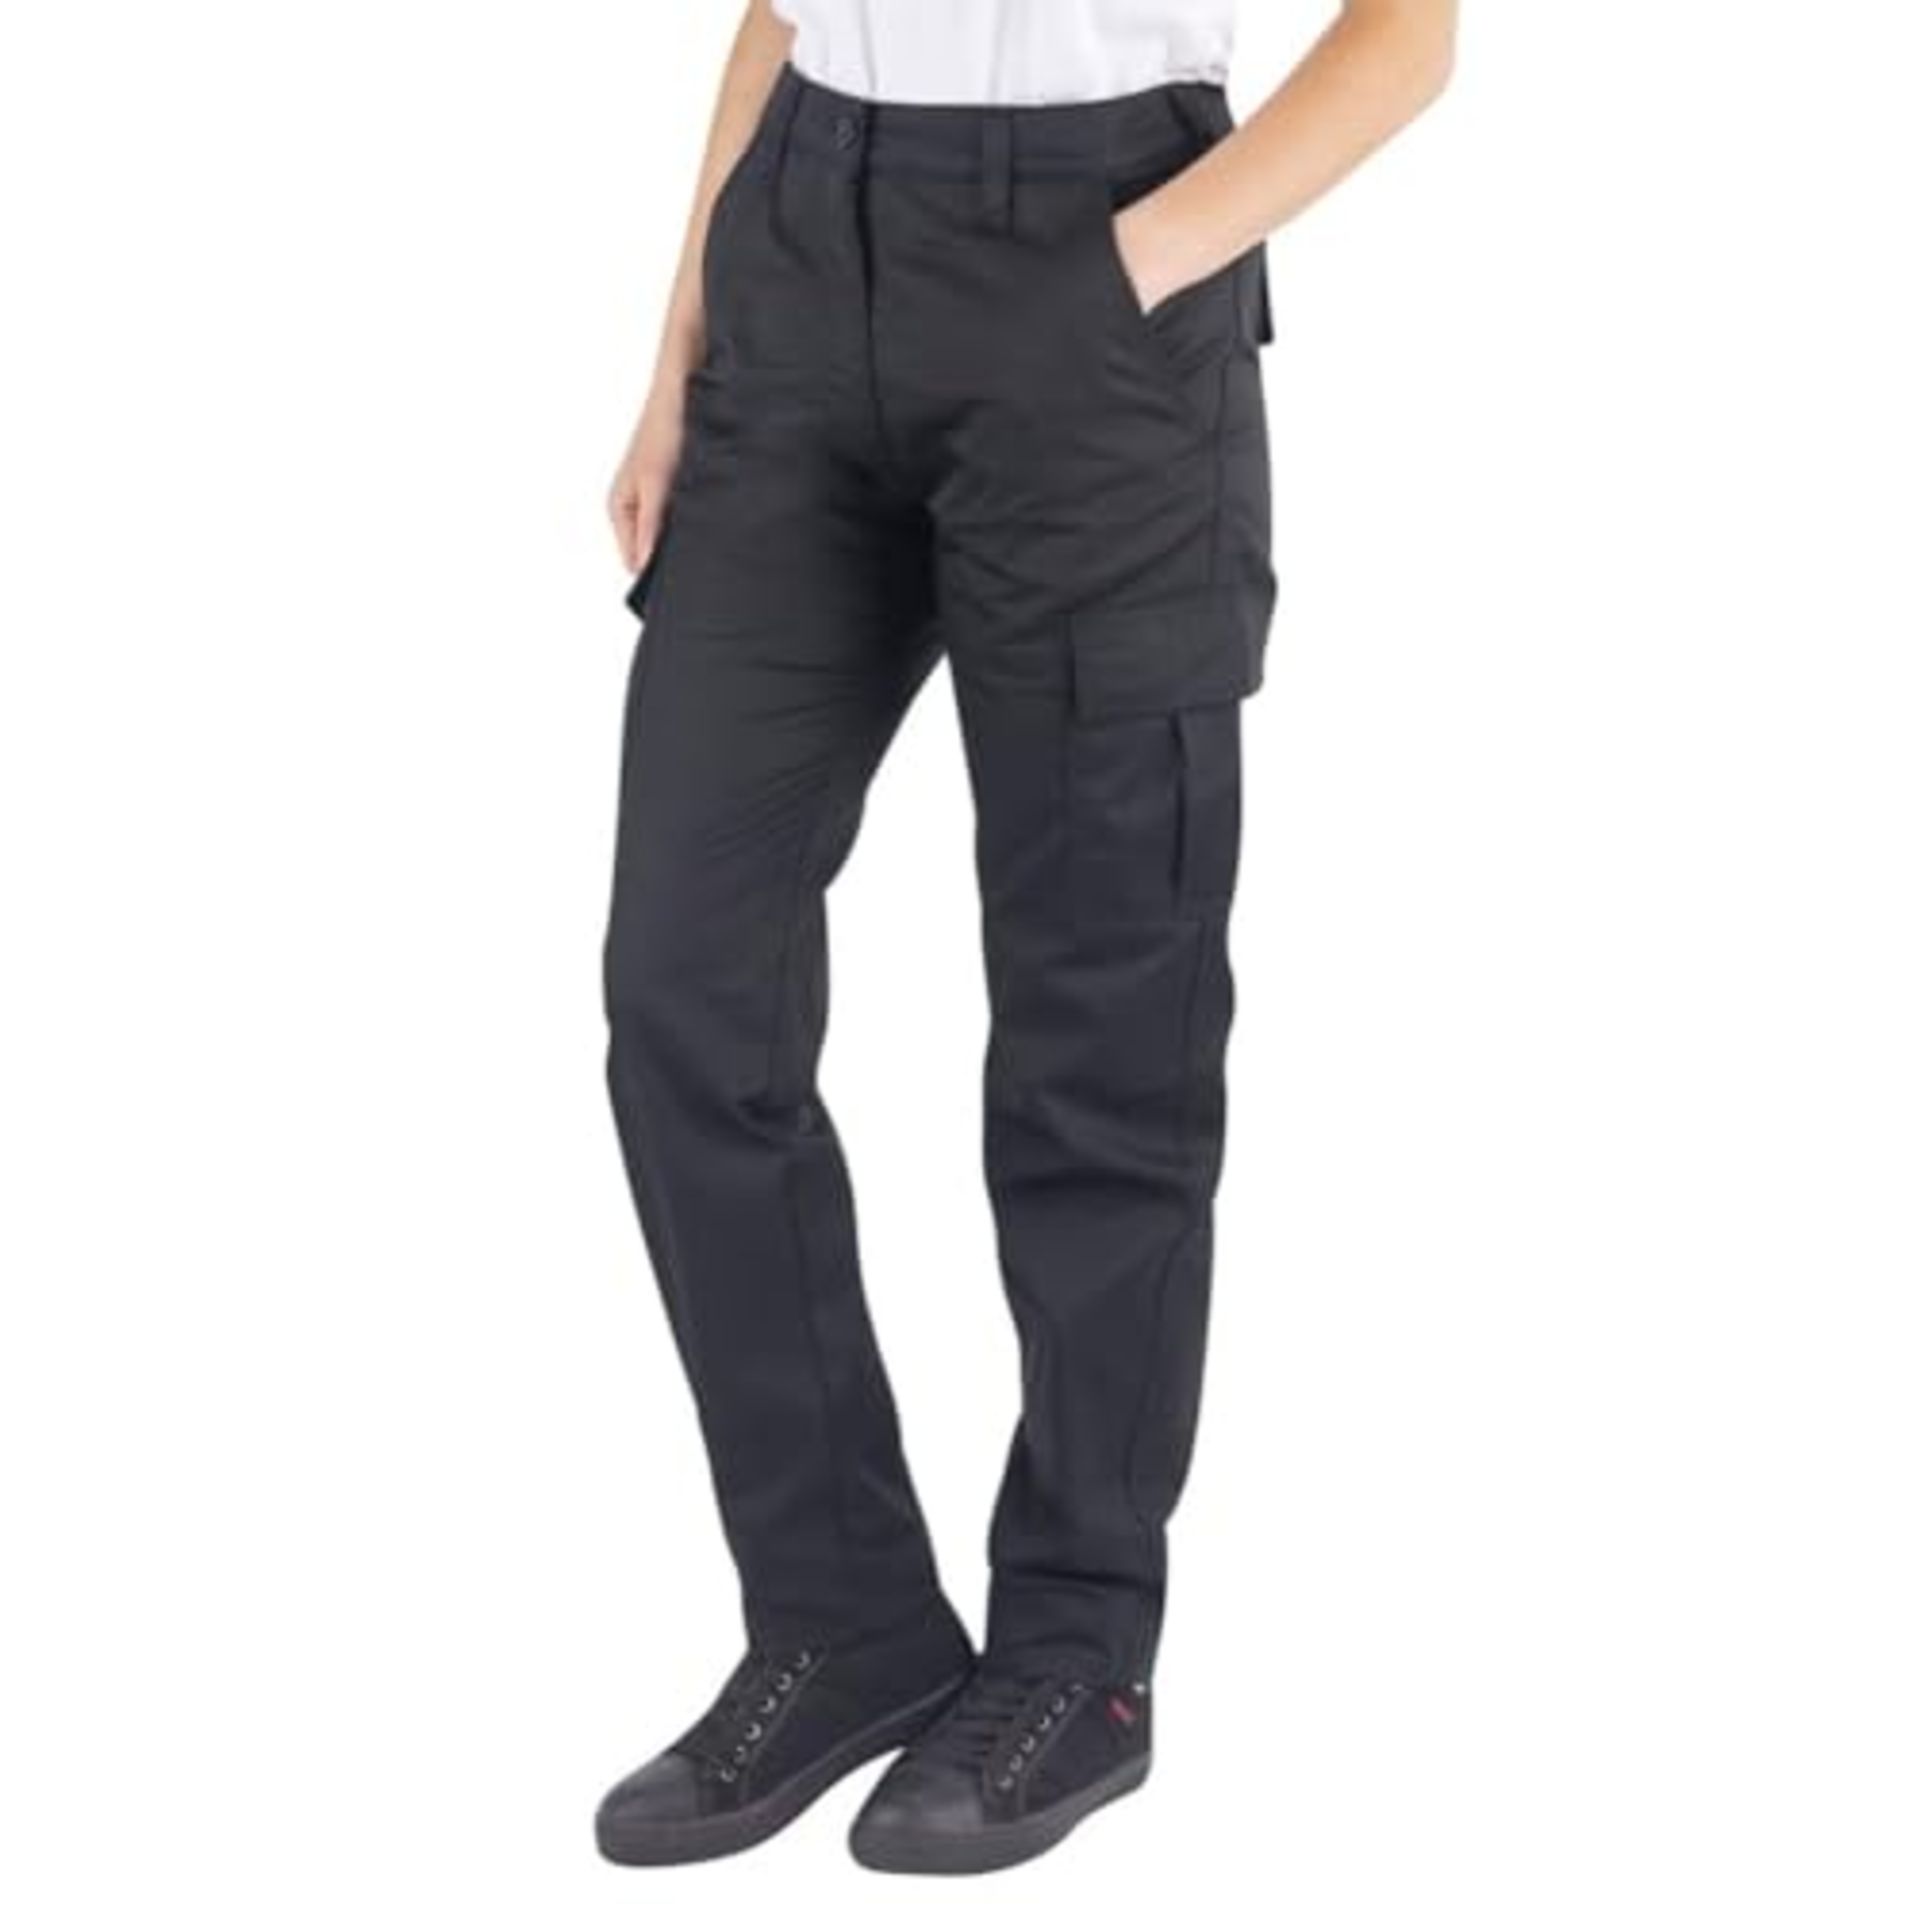 Lee Cooper Ladies Heavy Duty Easy Care Multi Pocket Work Safety Classic Cargo Pants Tr - Image 2 of 2